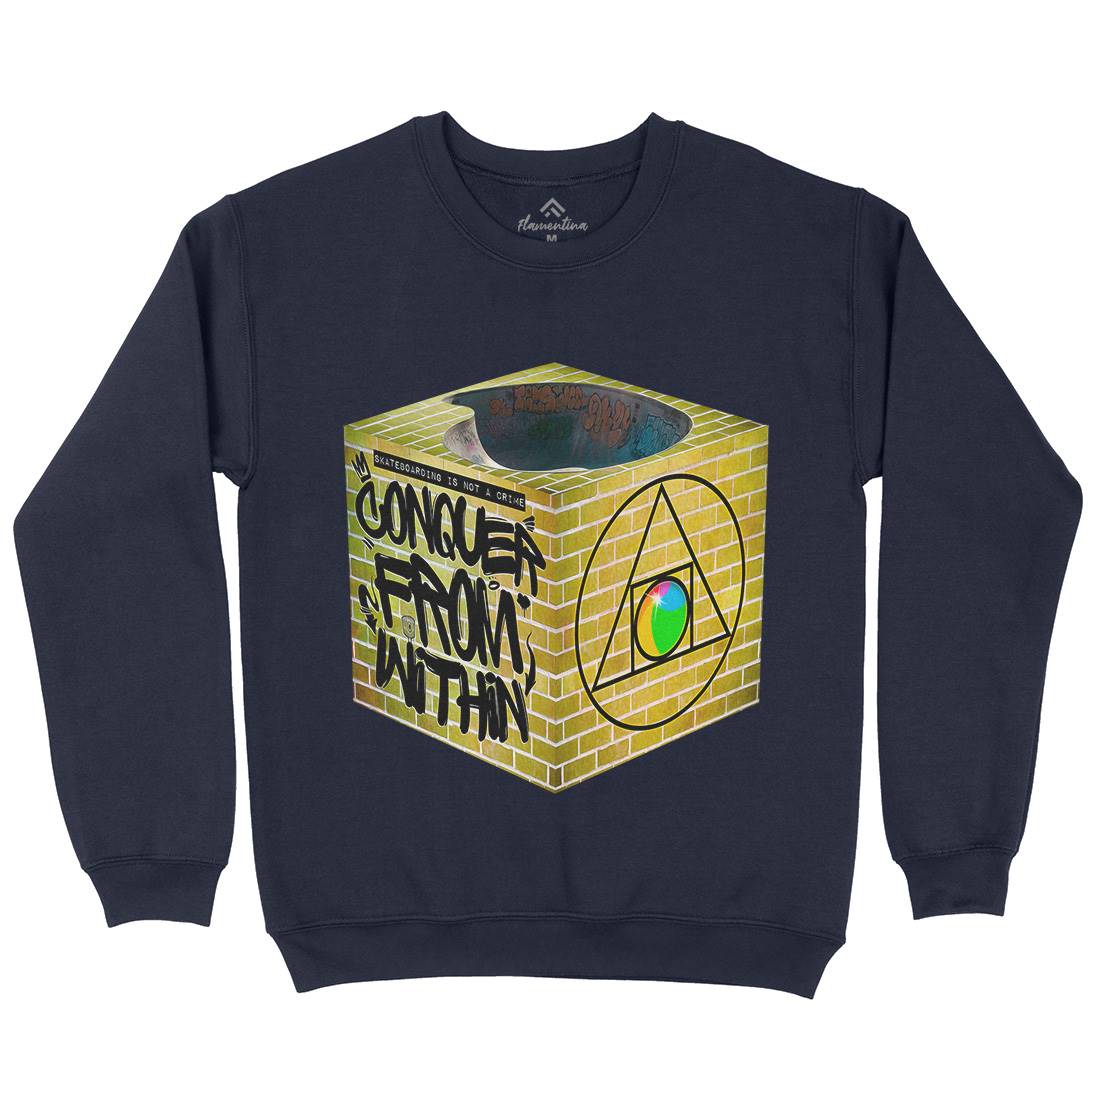 From Within Kids Crew Neck Sweatshirt Skate A838